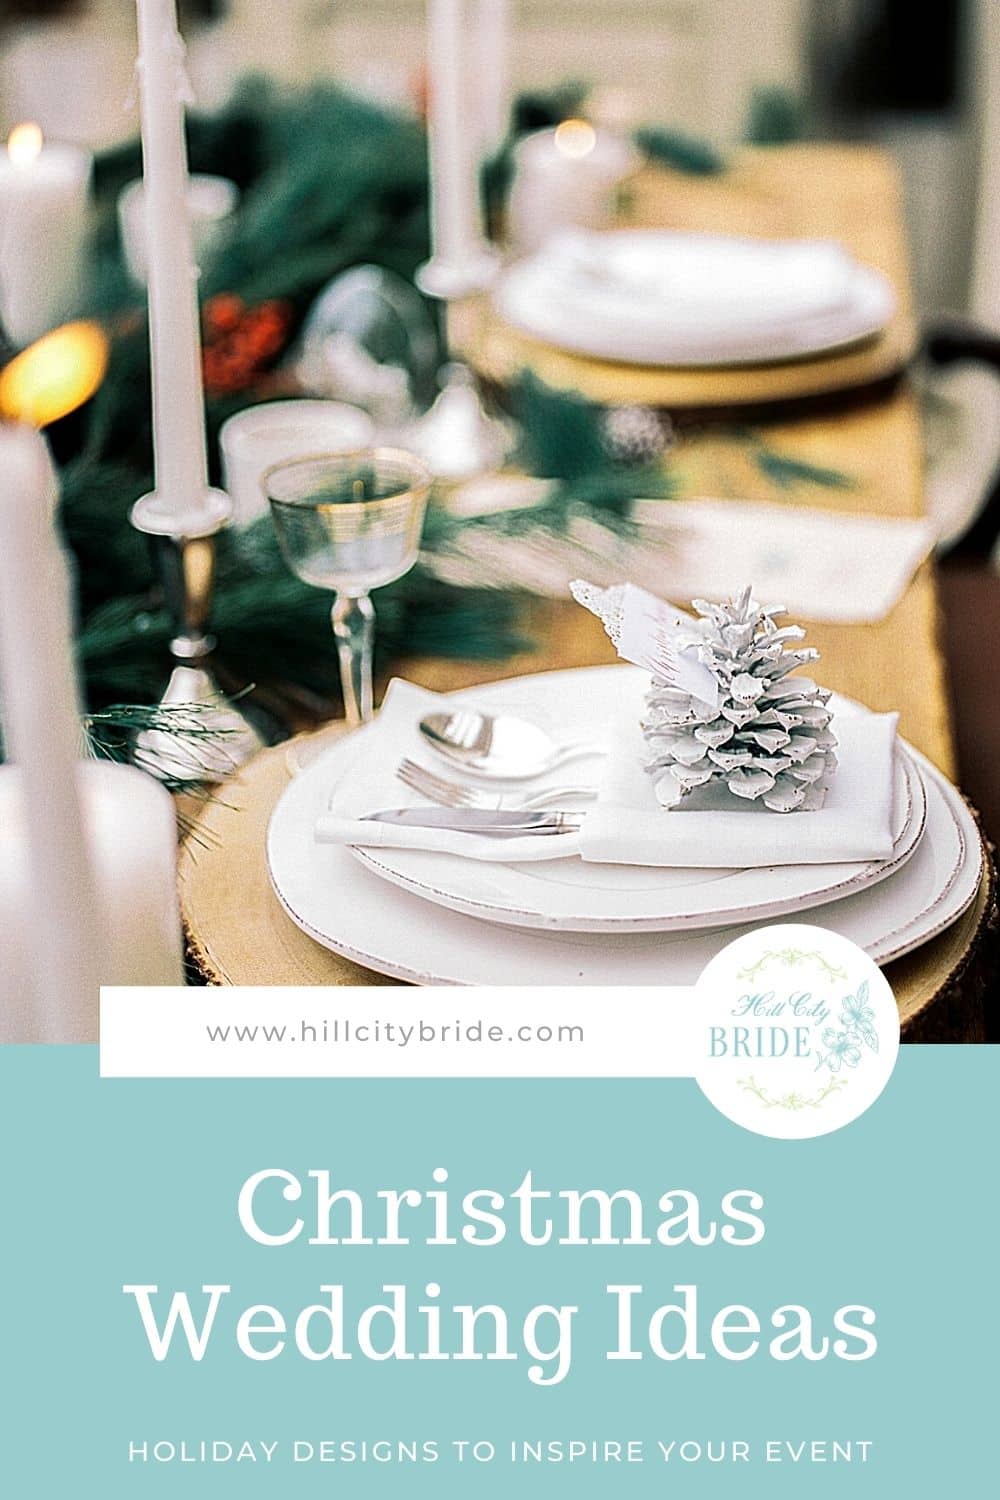 See Amazing Christmas Wedding Ideas in this Winter Styled Shoot Inspiration